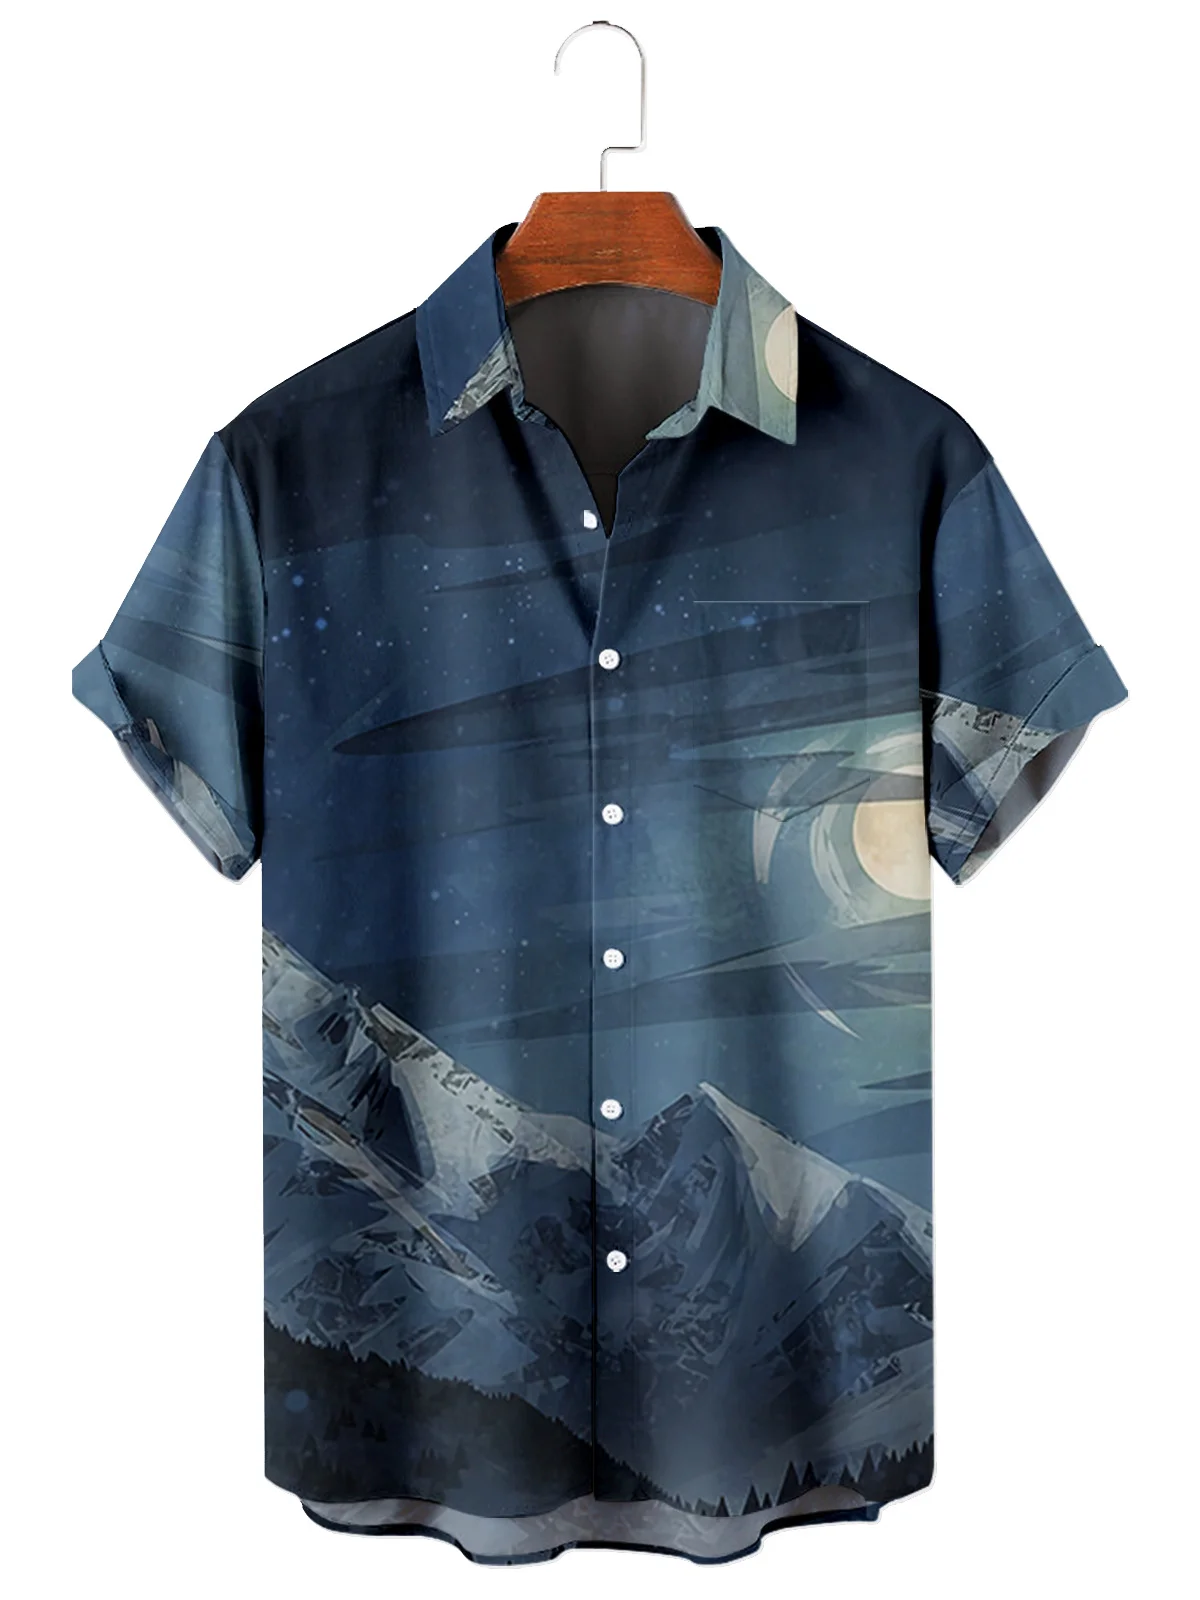 2022 Summer Beach Casual Men's Short Sleeve Lapel Shirt Plus Size Mountain 2 3D Printed Men's Top with Pockets